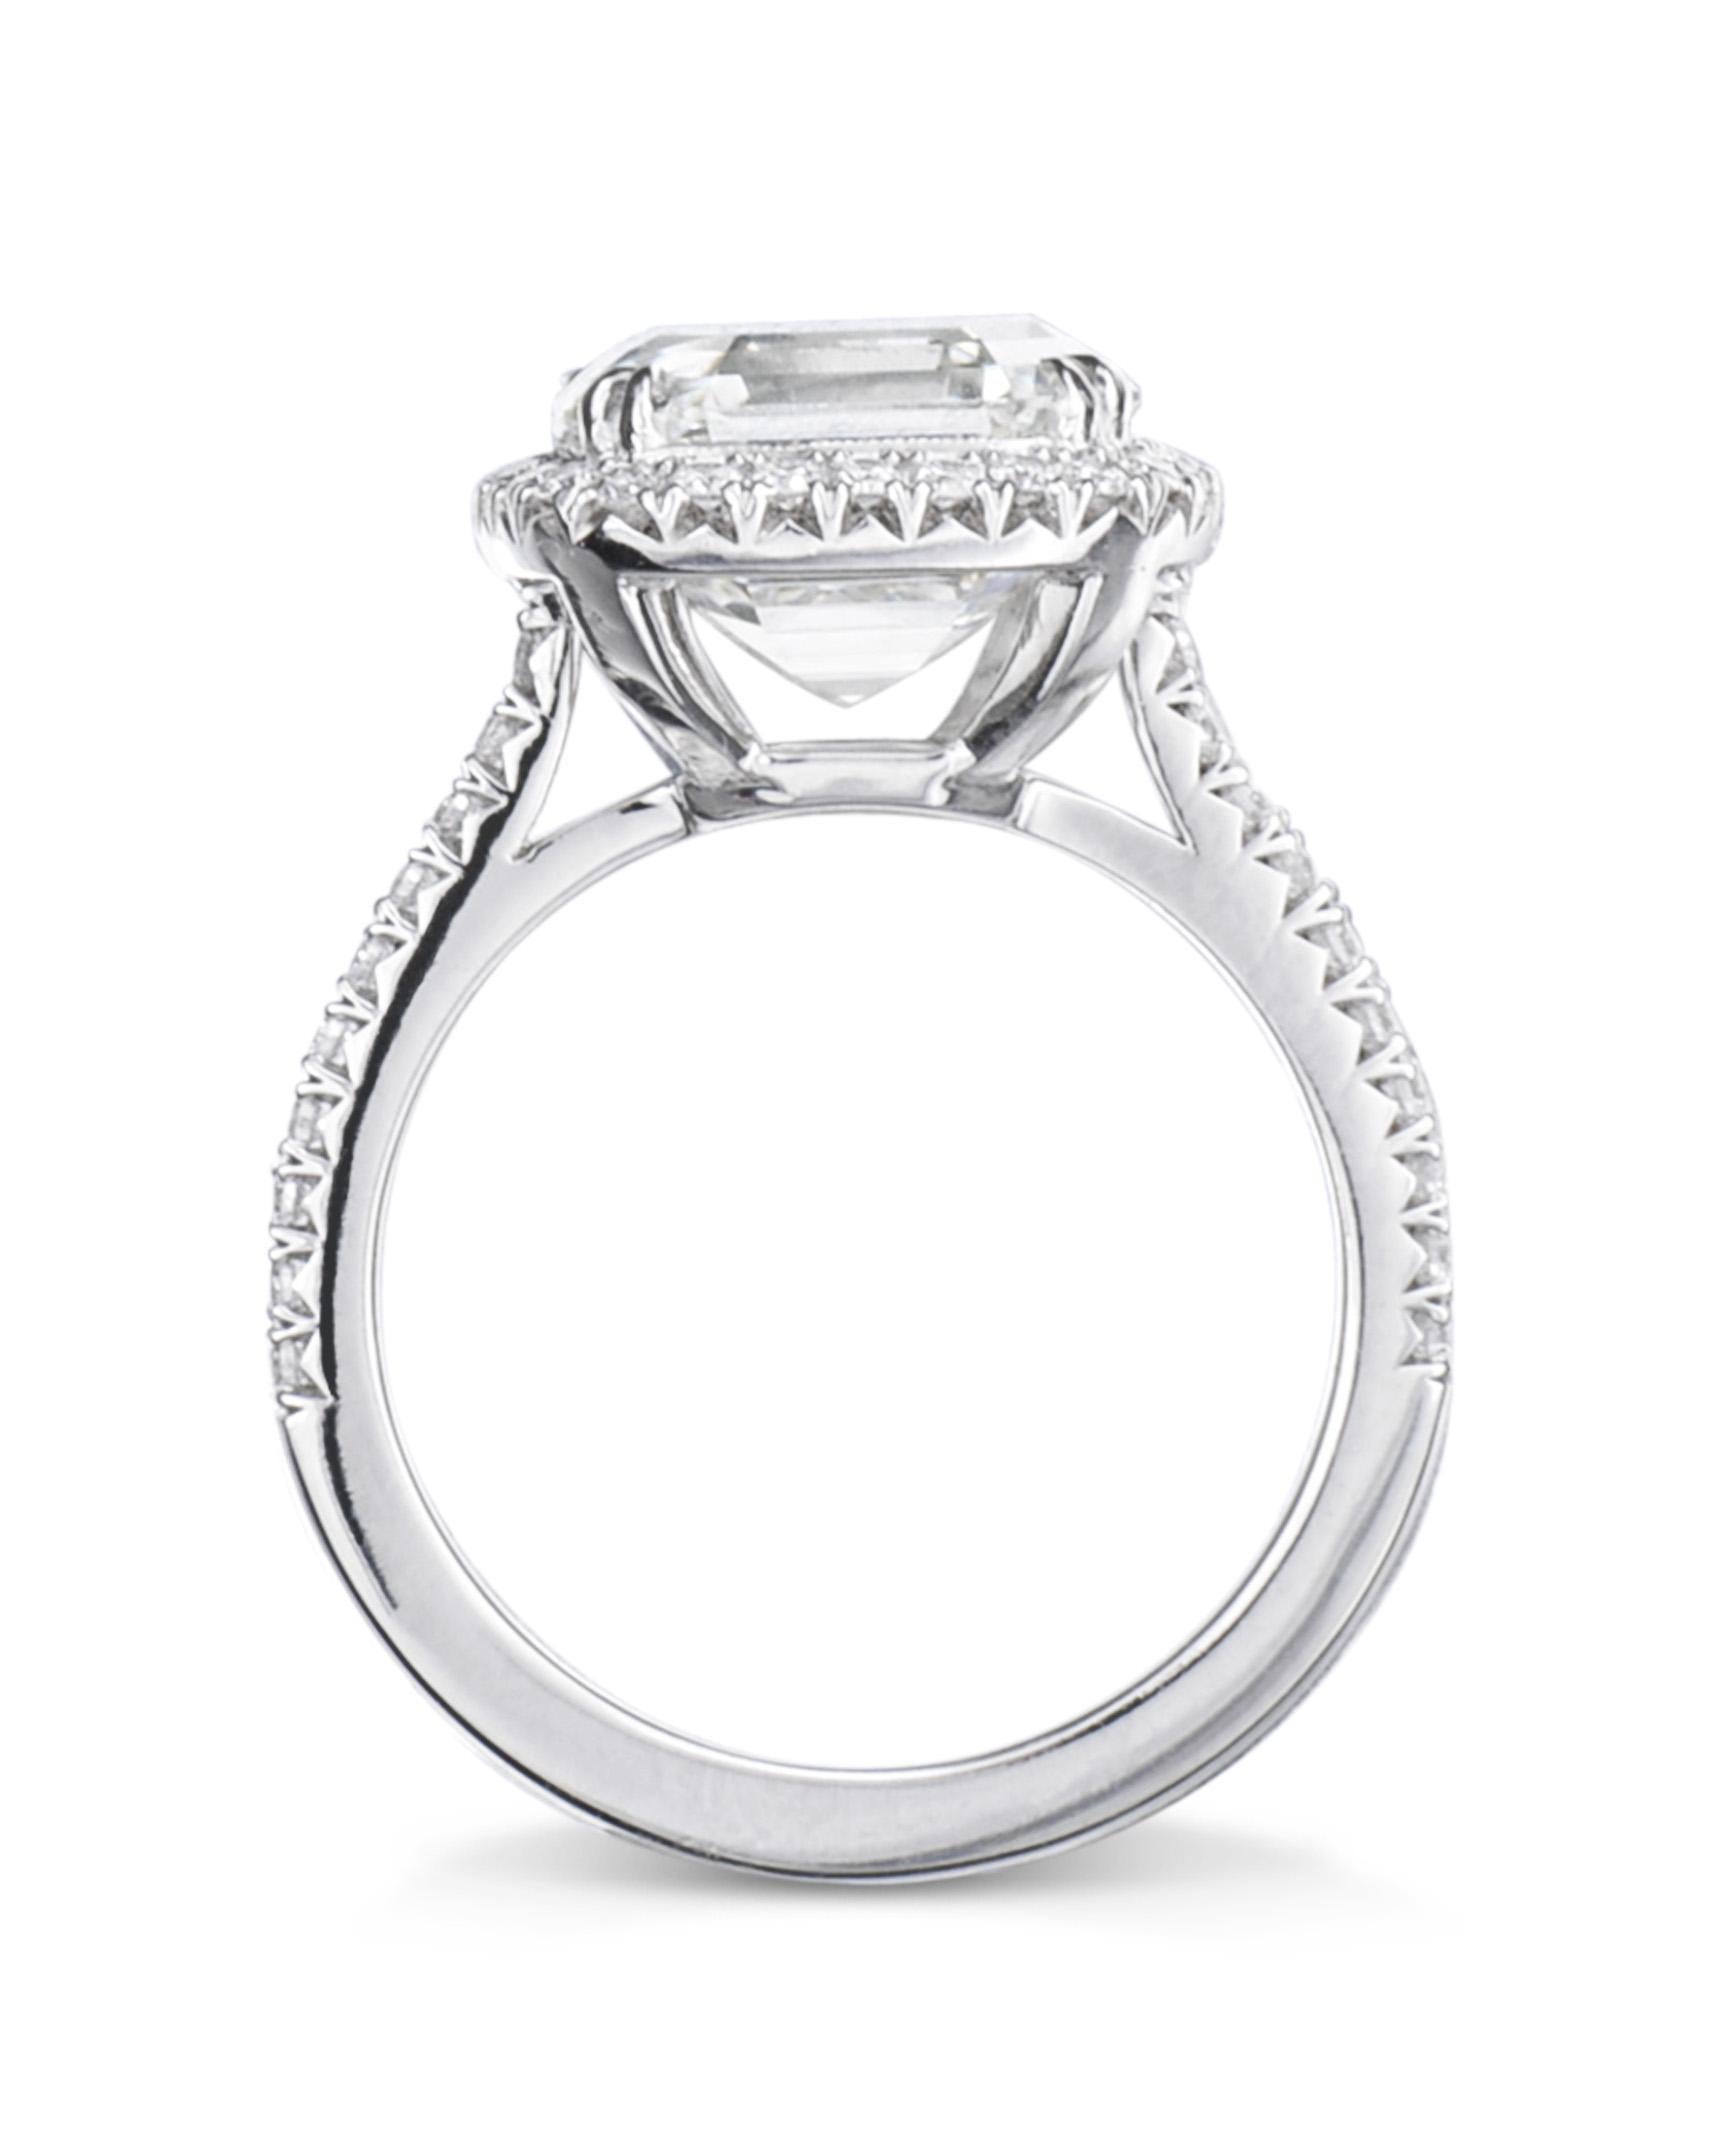 The One, an exceptional engagement ring and unique piece of fine jewelry, features a asscher-cut diamond center stone, framed by micropavé diamonds, set on a micropavé band. The timeless glamour of the micropavé setting has quickly become an iconic